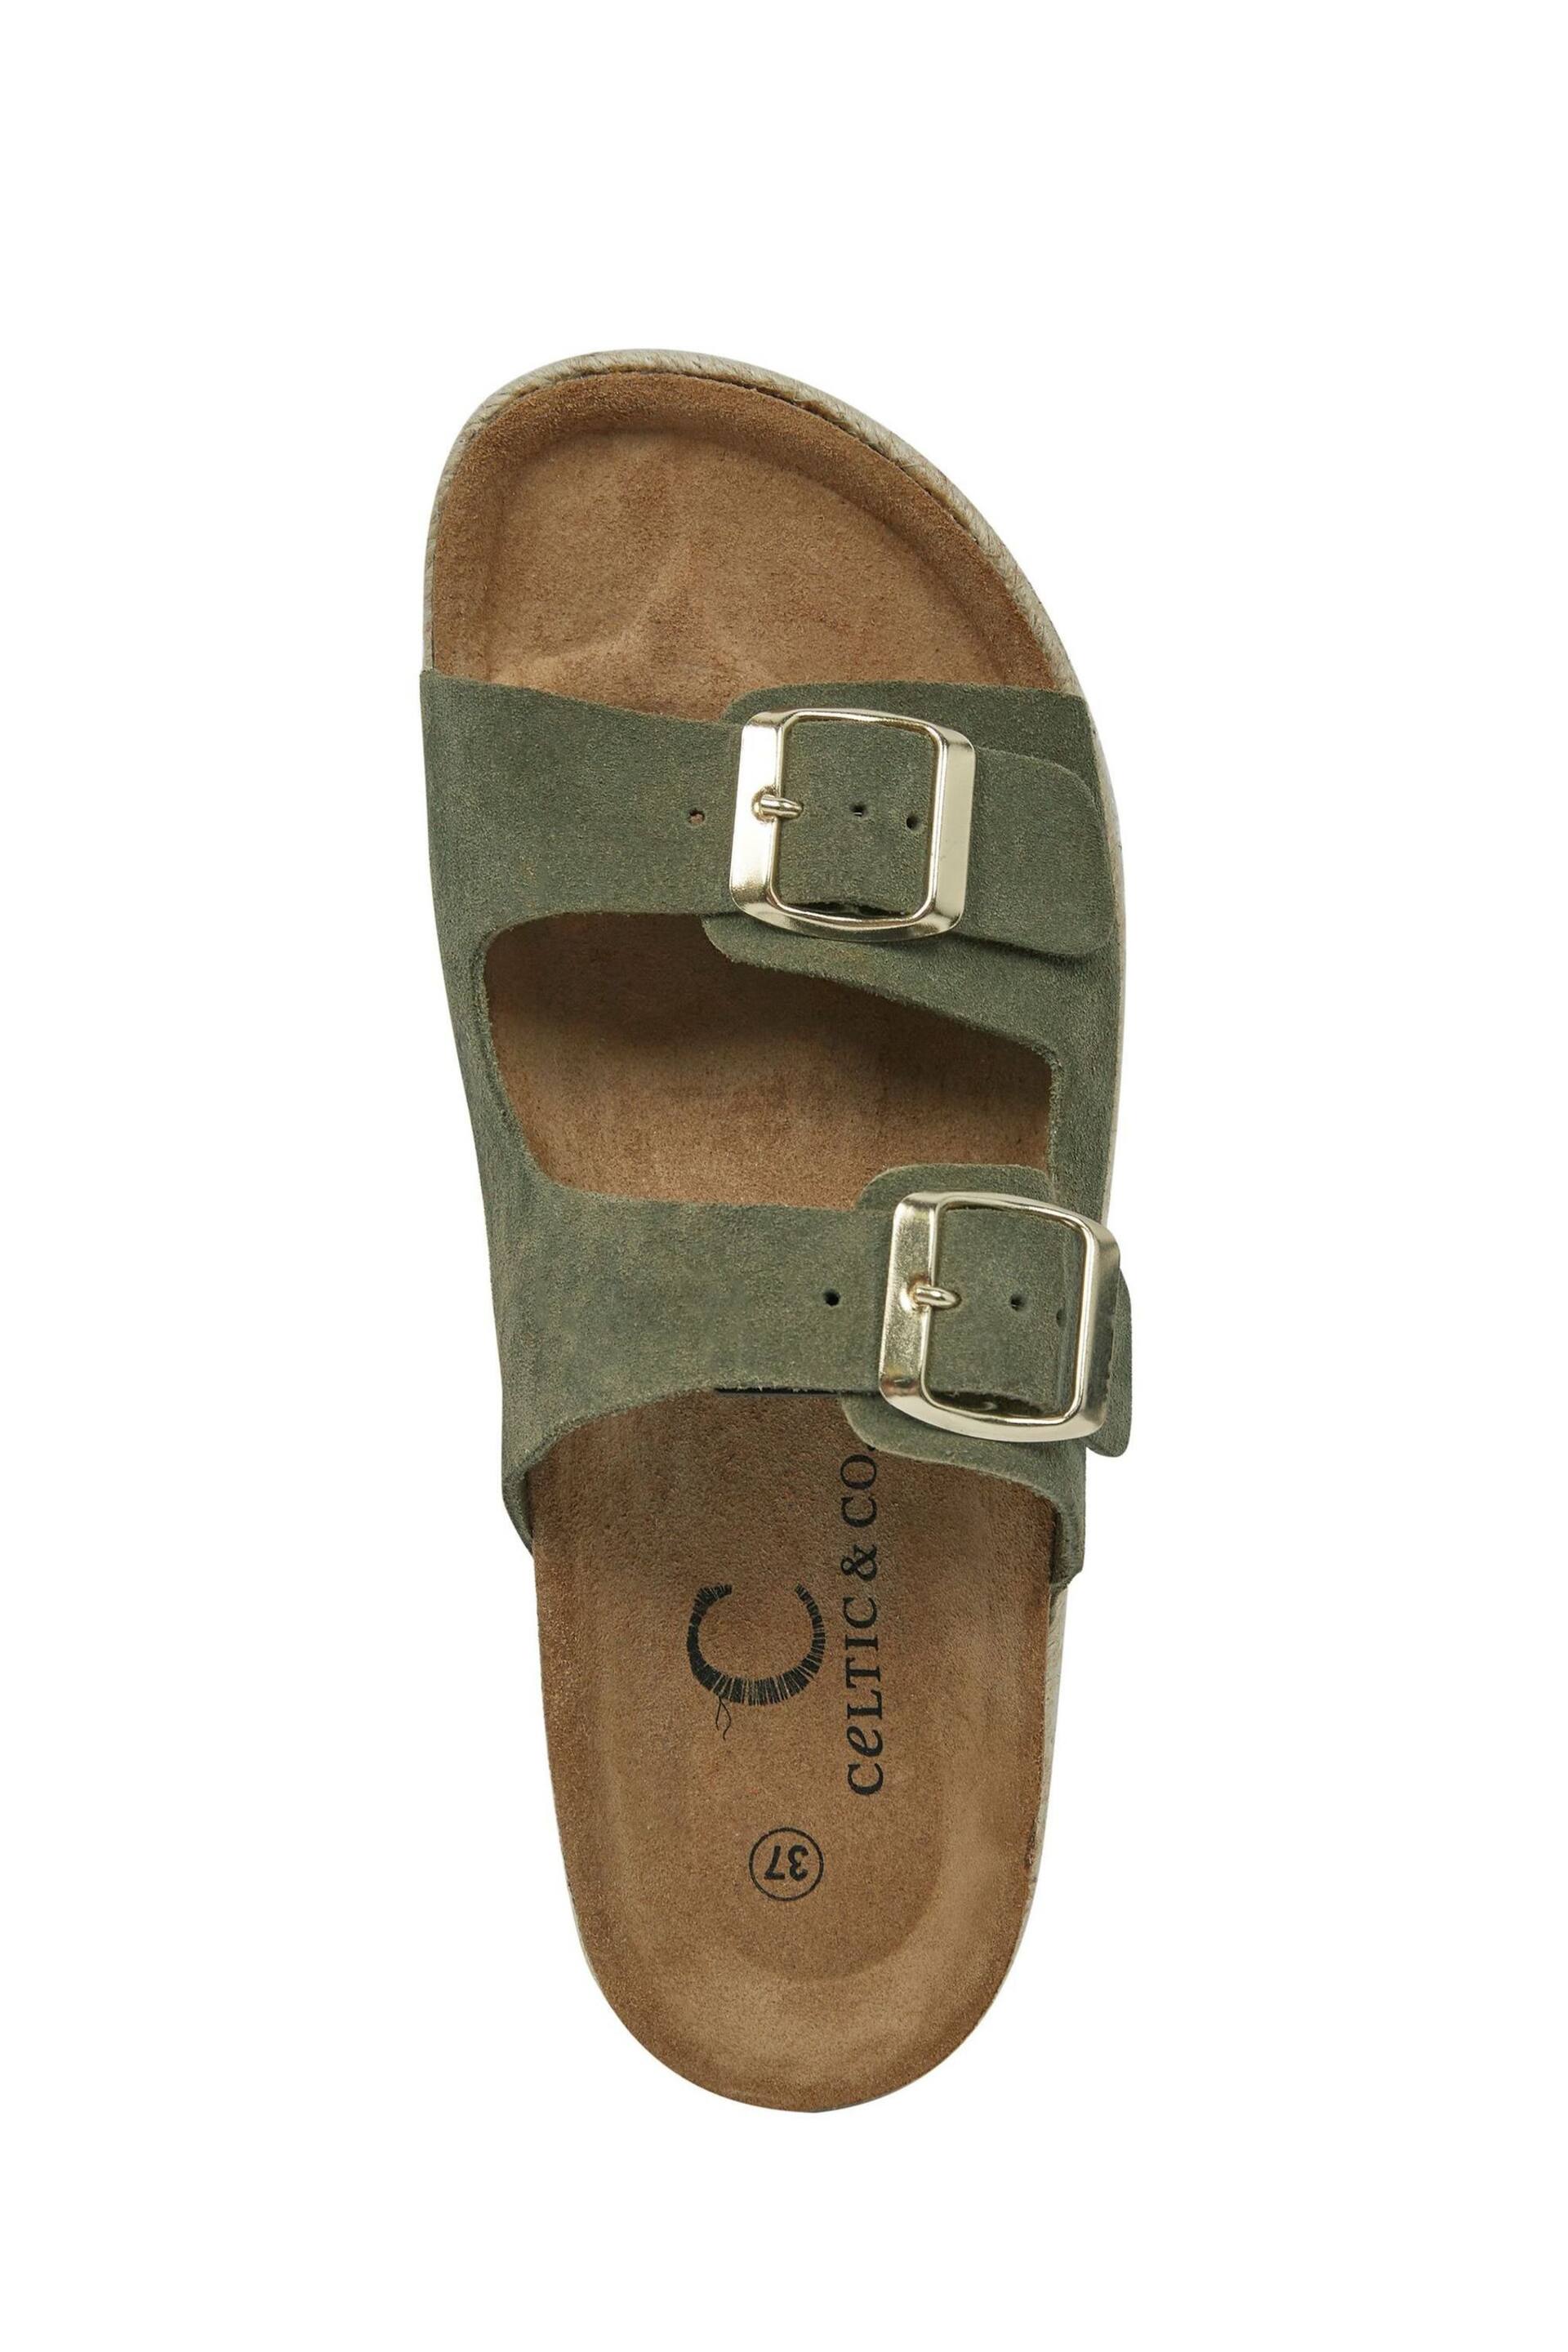 Celtic & Co. Green Double Buckle Sandals - Image 5 of 6